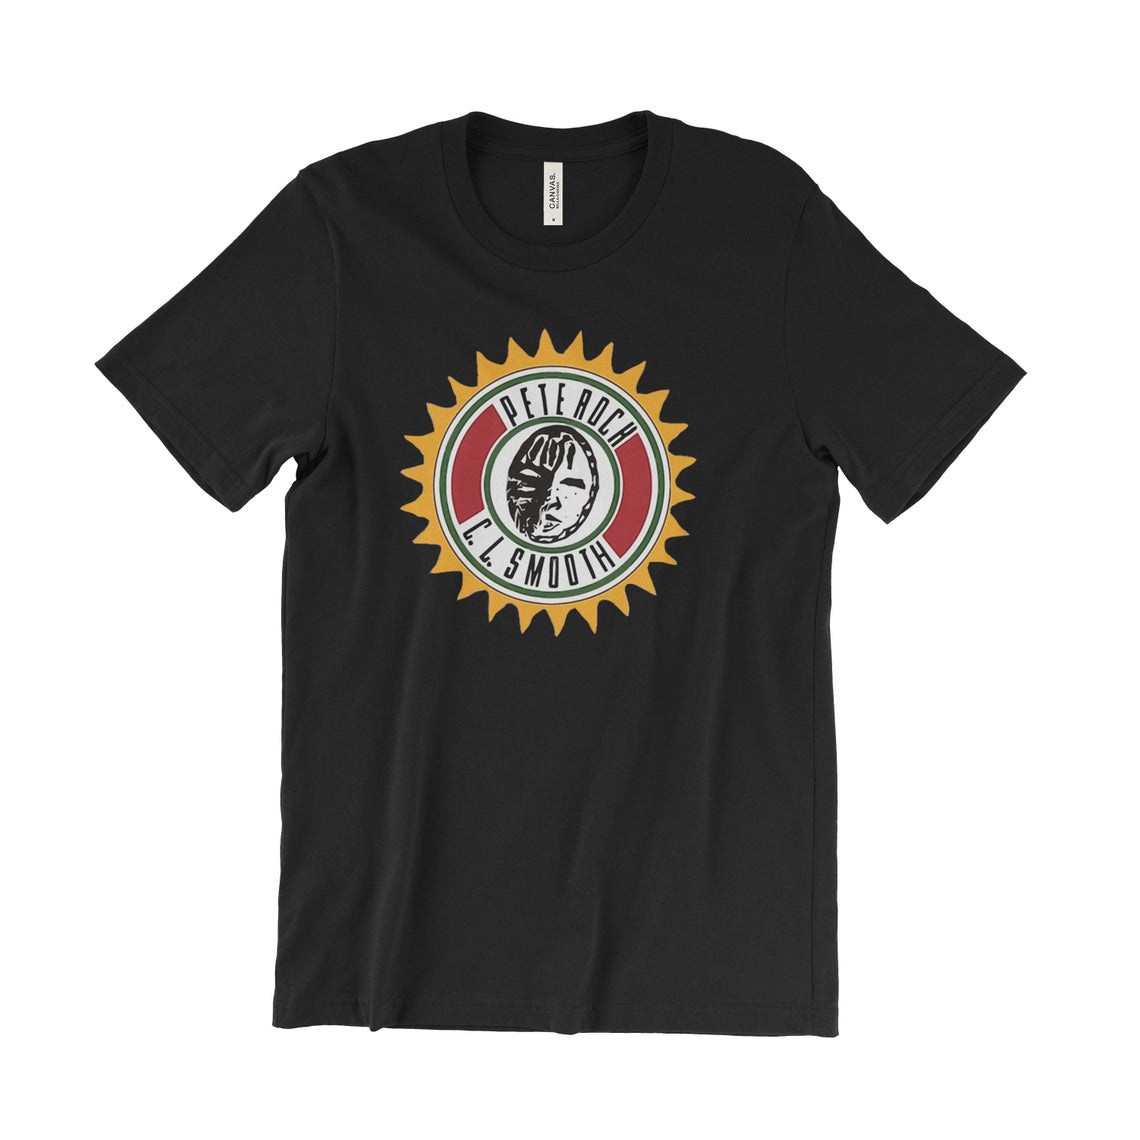 Pete Rock & CL Smooth T-Shirt NA